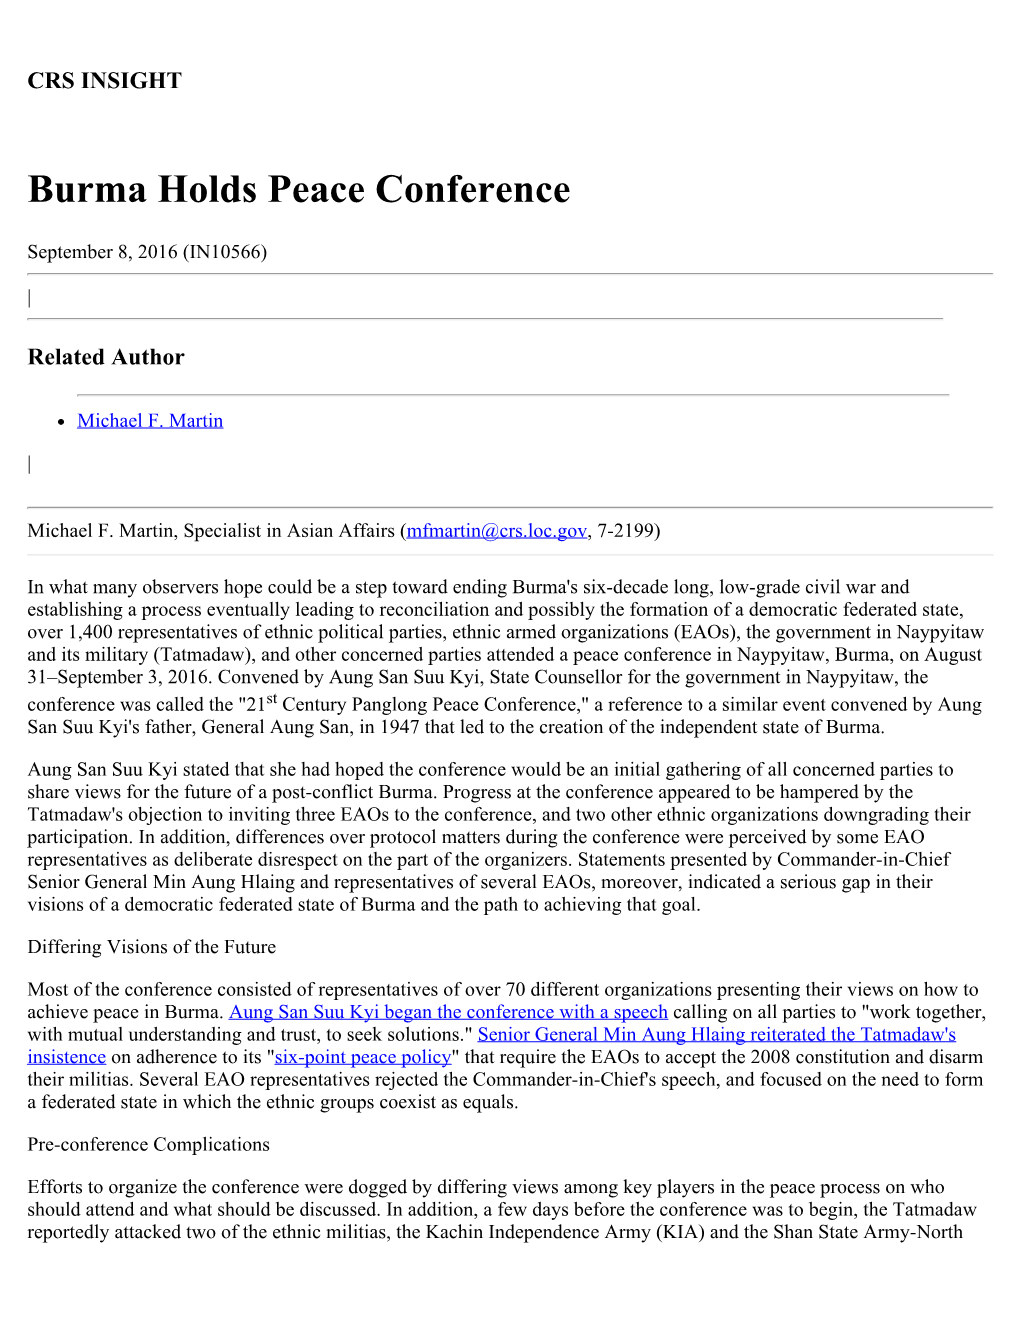 Burma Holds Peace Conference